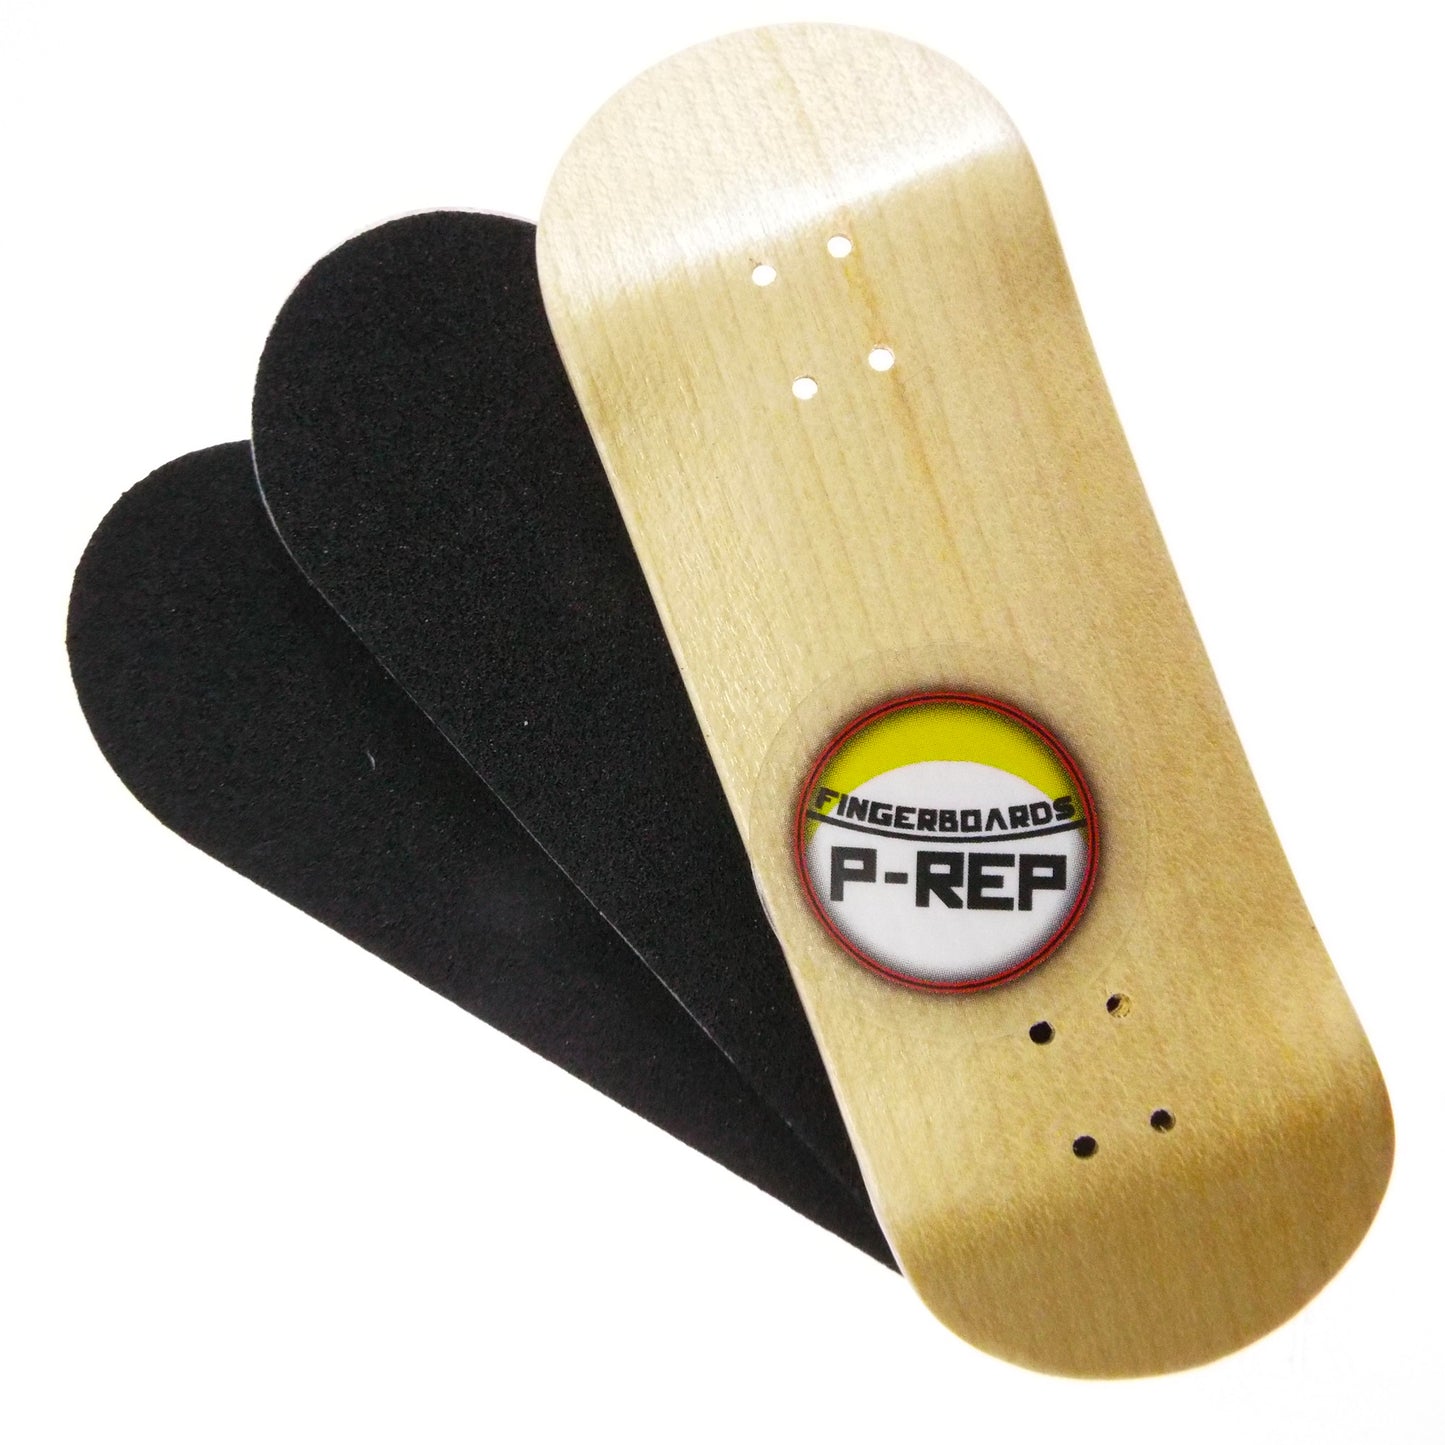 P-REP  32mm x 97mm Natural Deck - Maple